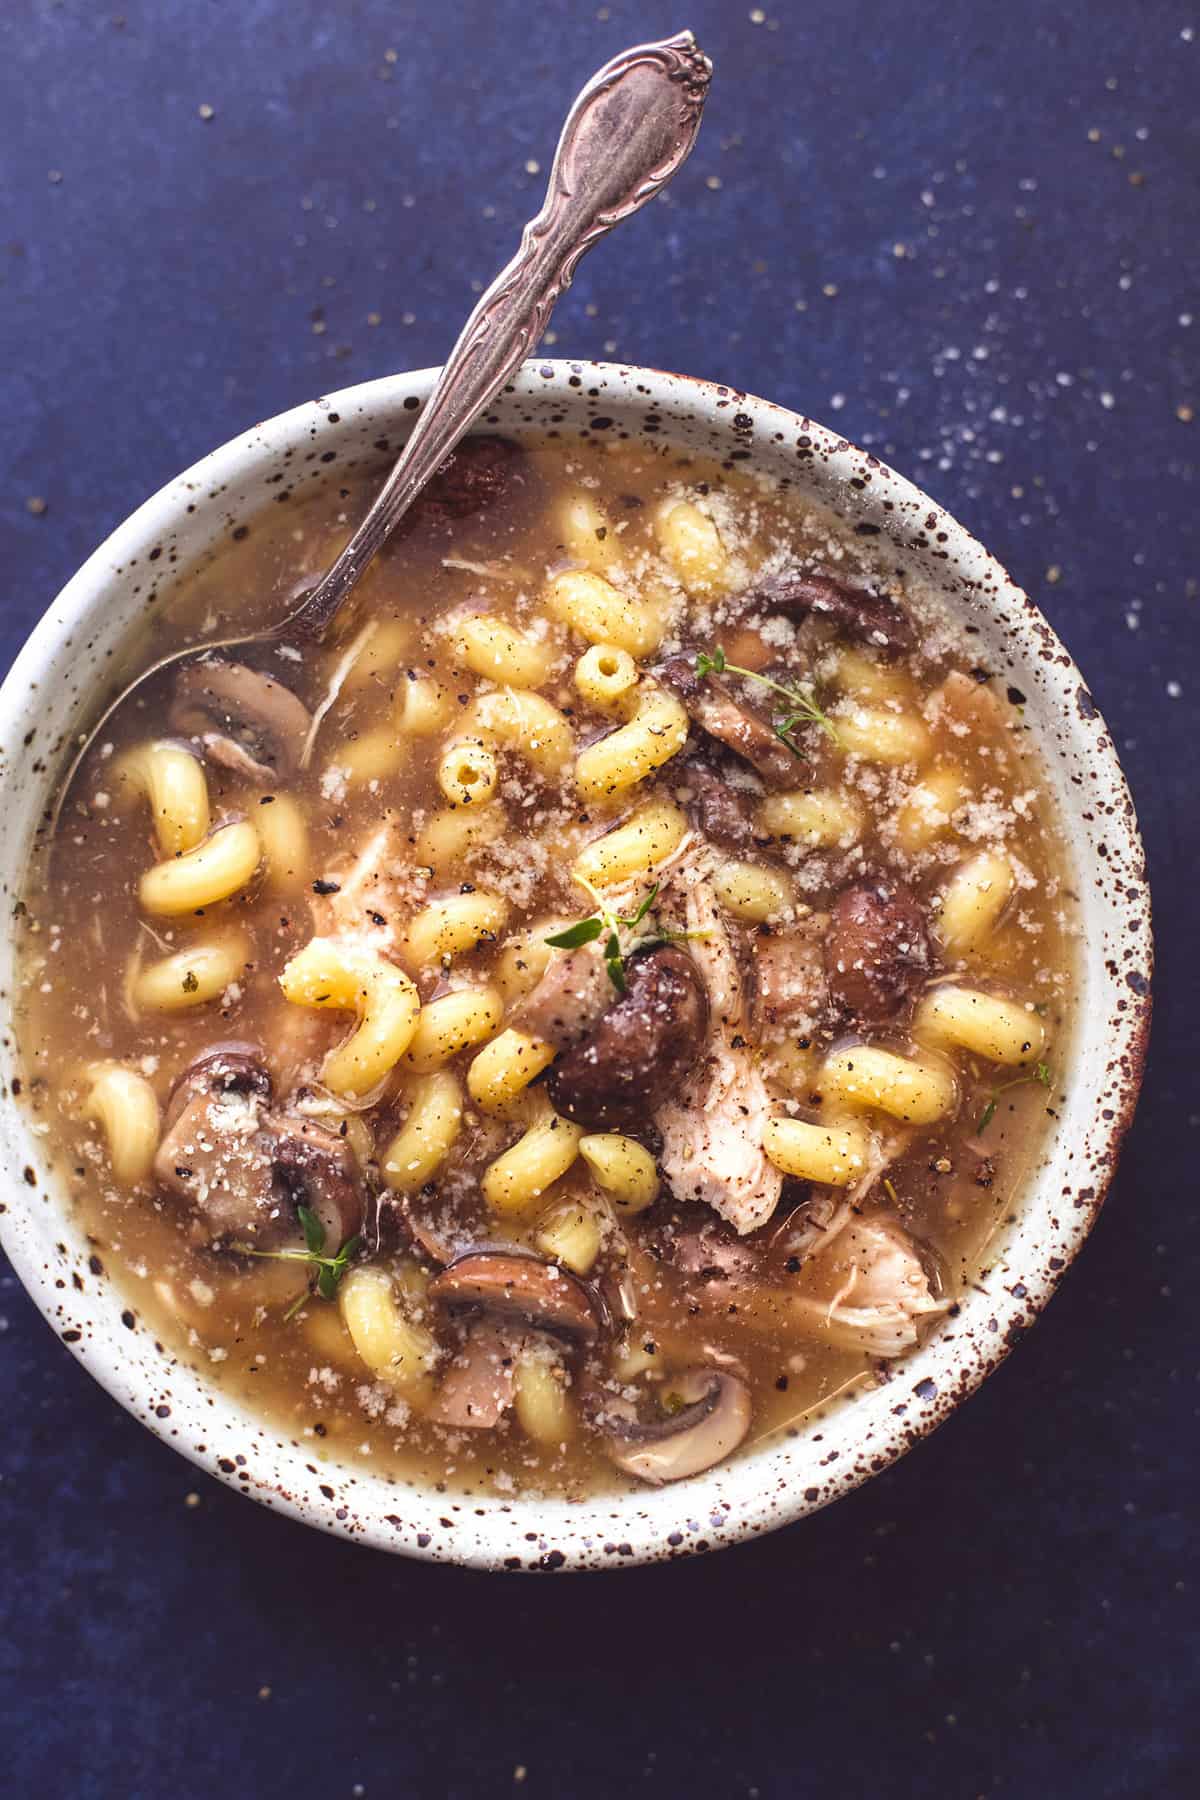 Soups for Every Season: Recipes for your hob, microwave or slow